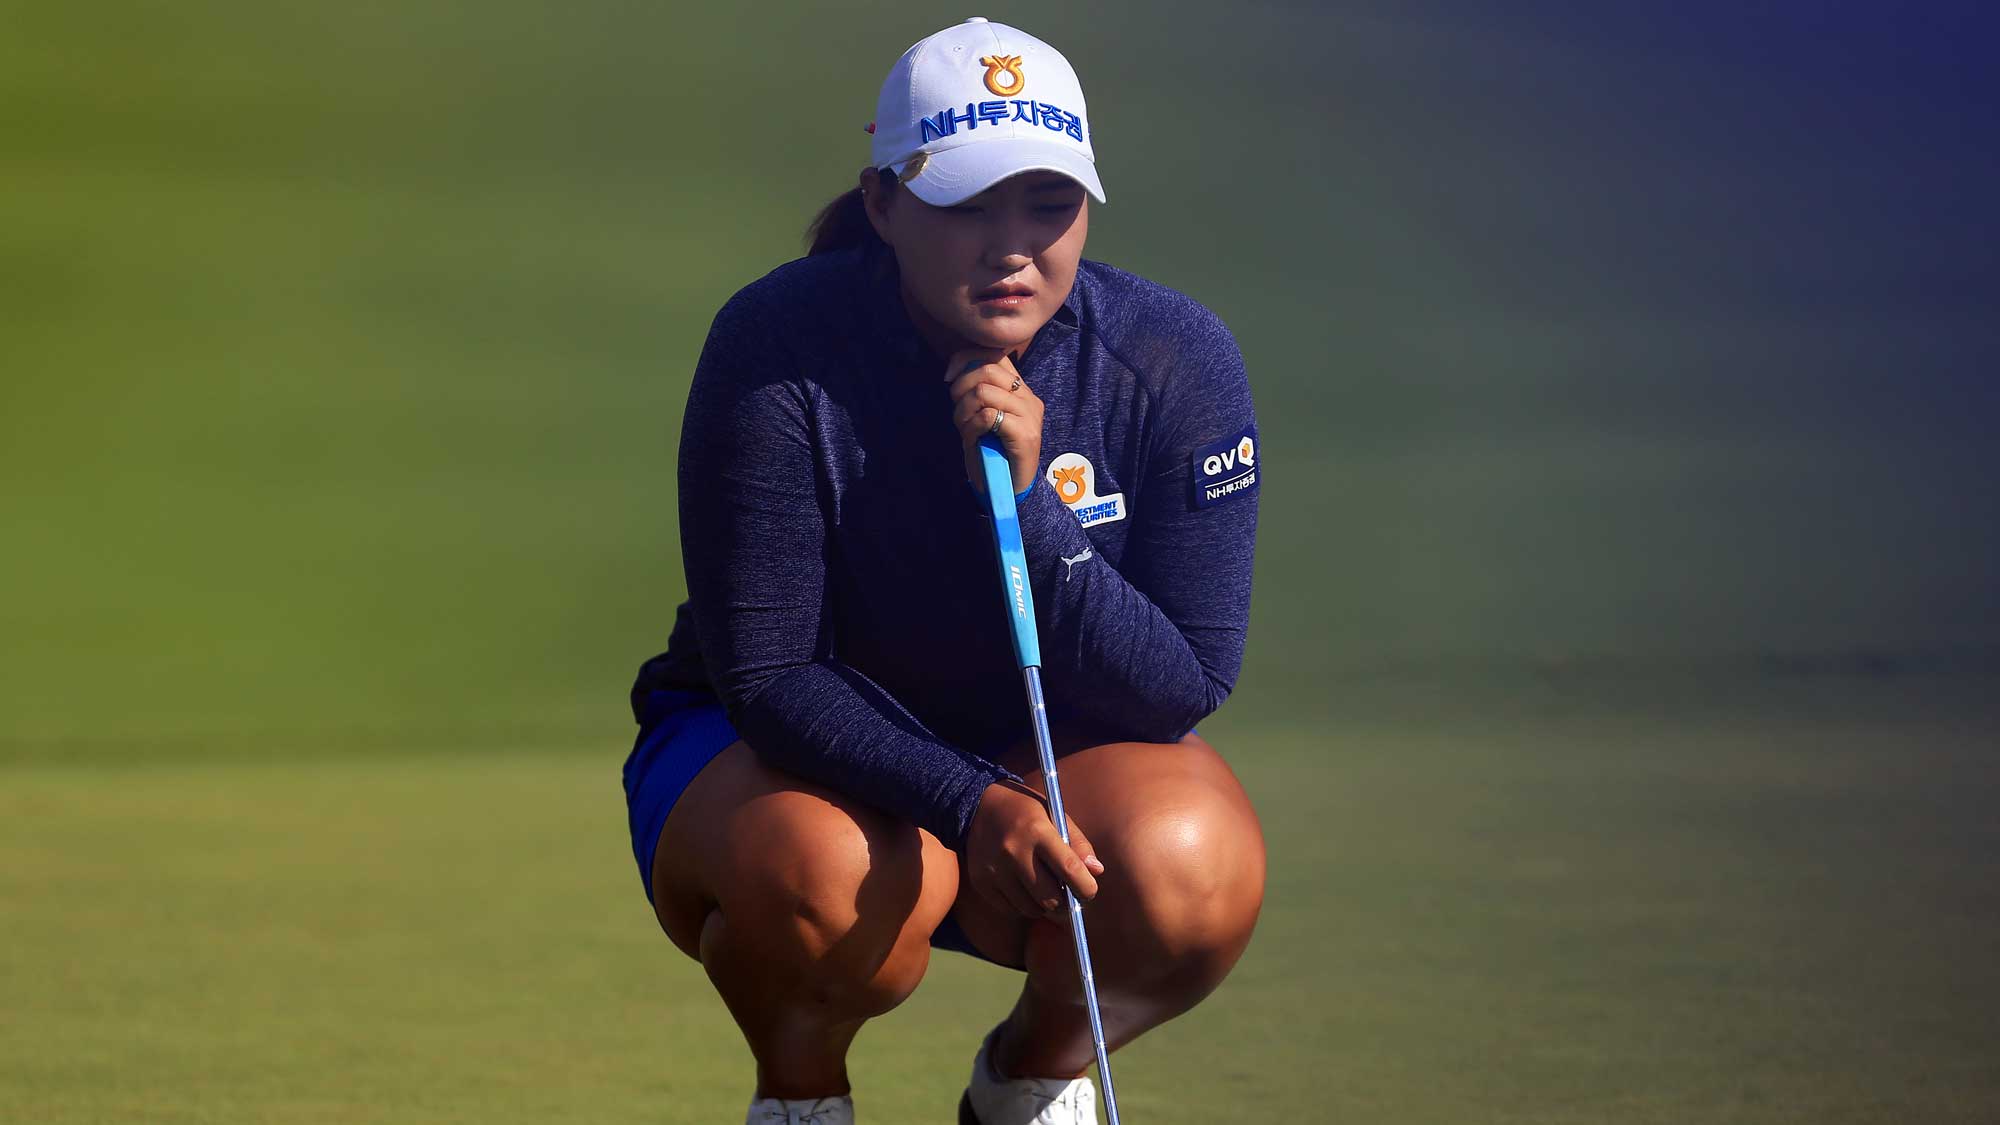 Mirim Lee of South Korea eyes up a putt on the 18th green during round three of the Canadian Pacific Women's Open